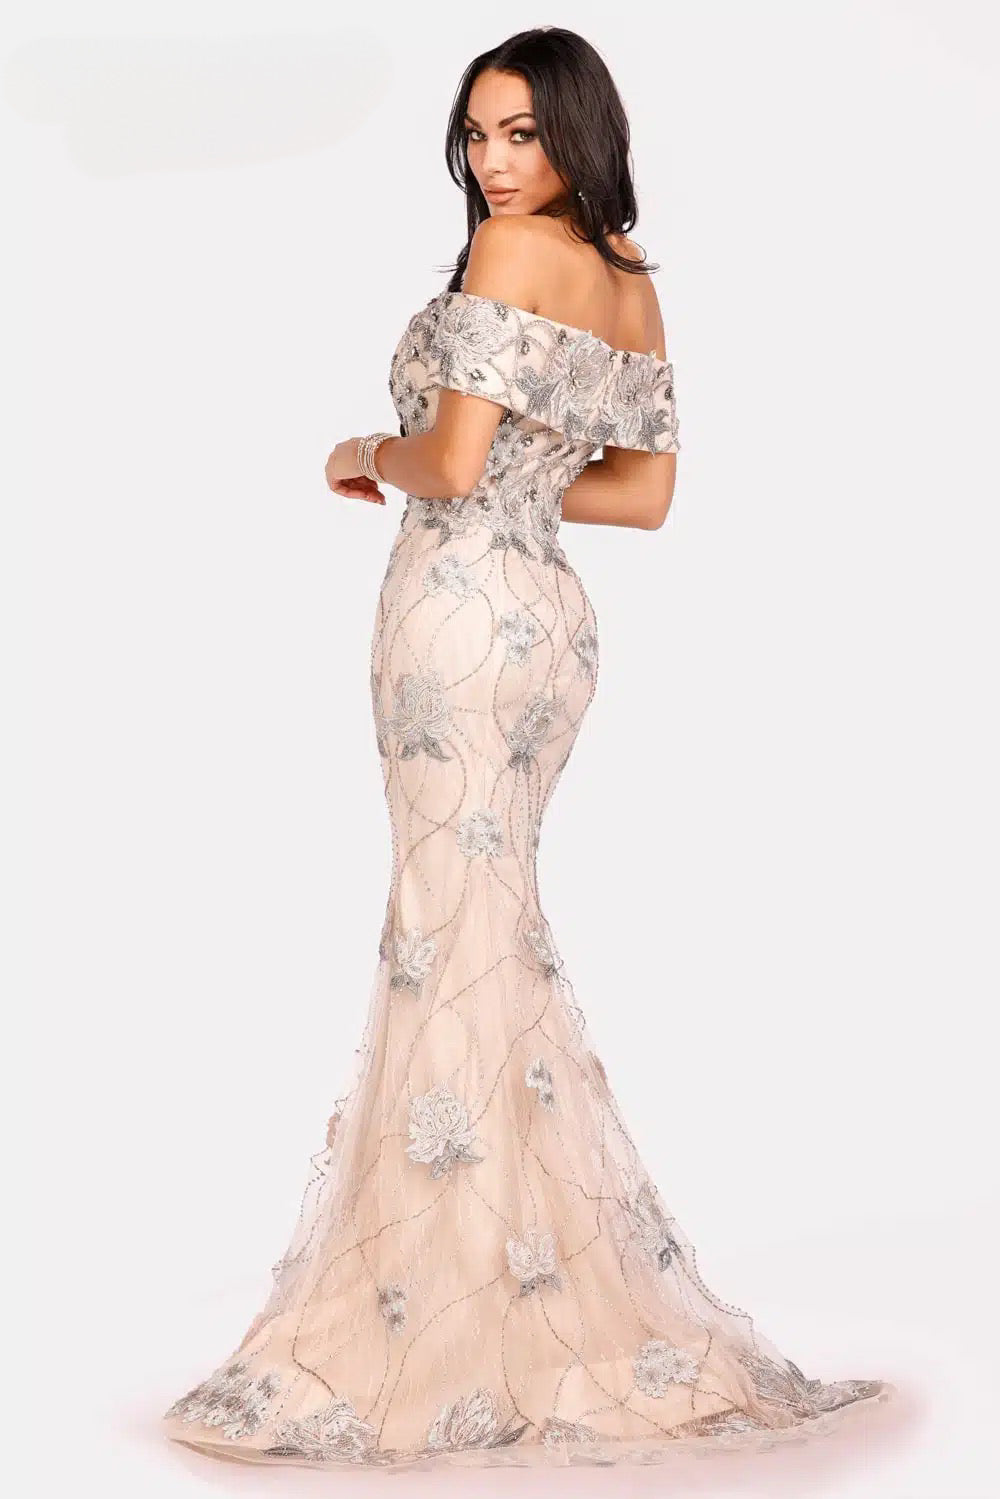 Terani Couture 231GL0416 Champagne Evening Dress - Off-Shoulder sweetheart neckline, mermaid train, embroidered floral motifs.